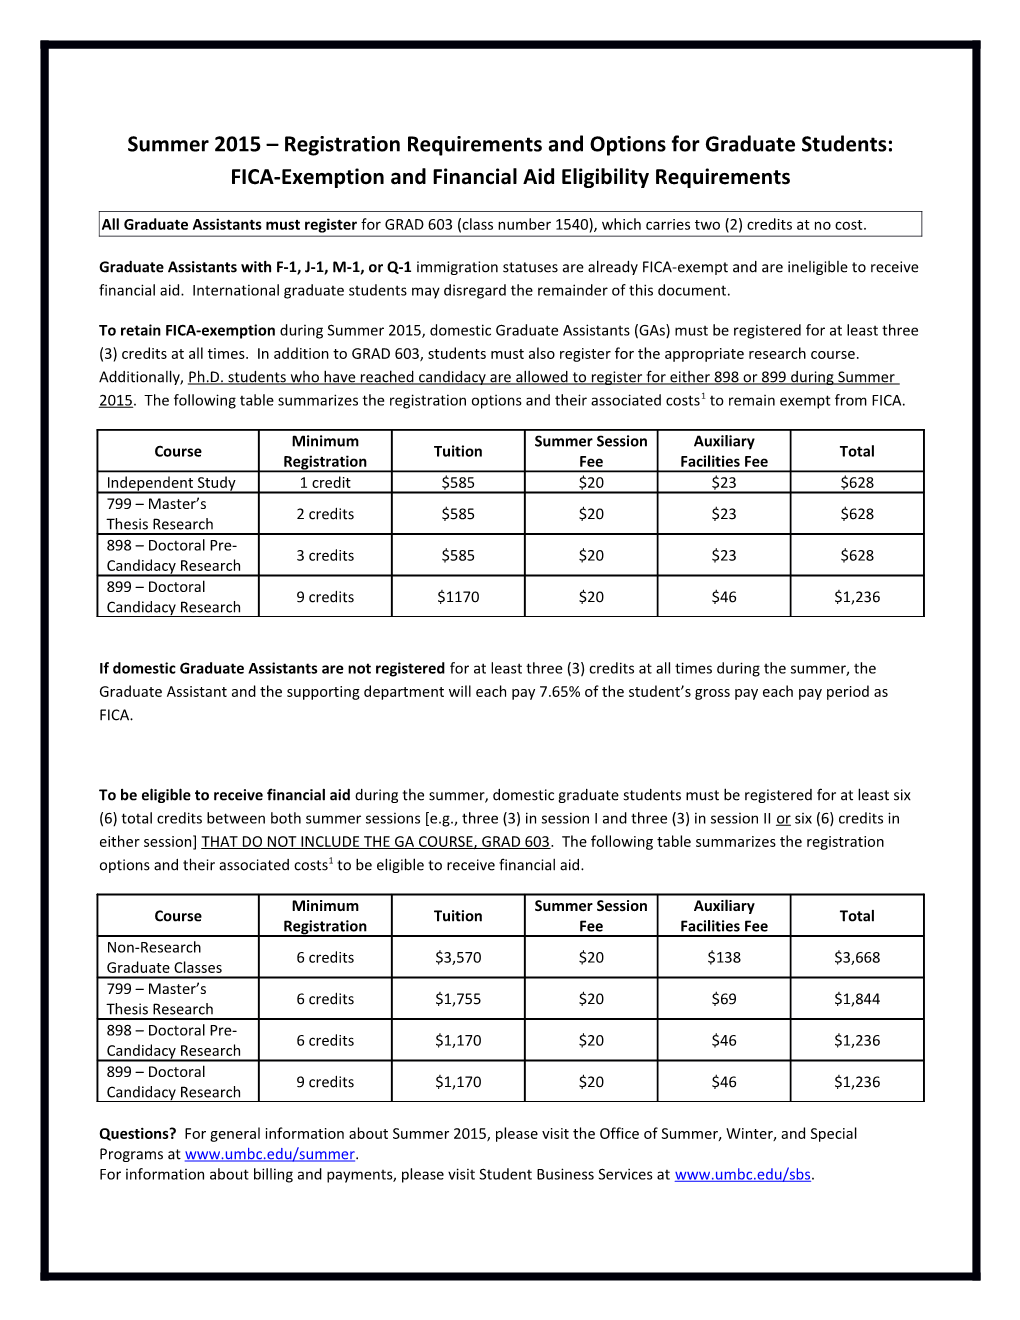 Summer 2015 Registration Requirements and Options for Graduate Students: FICA-Exemption